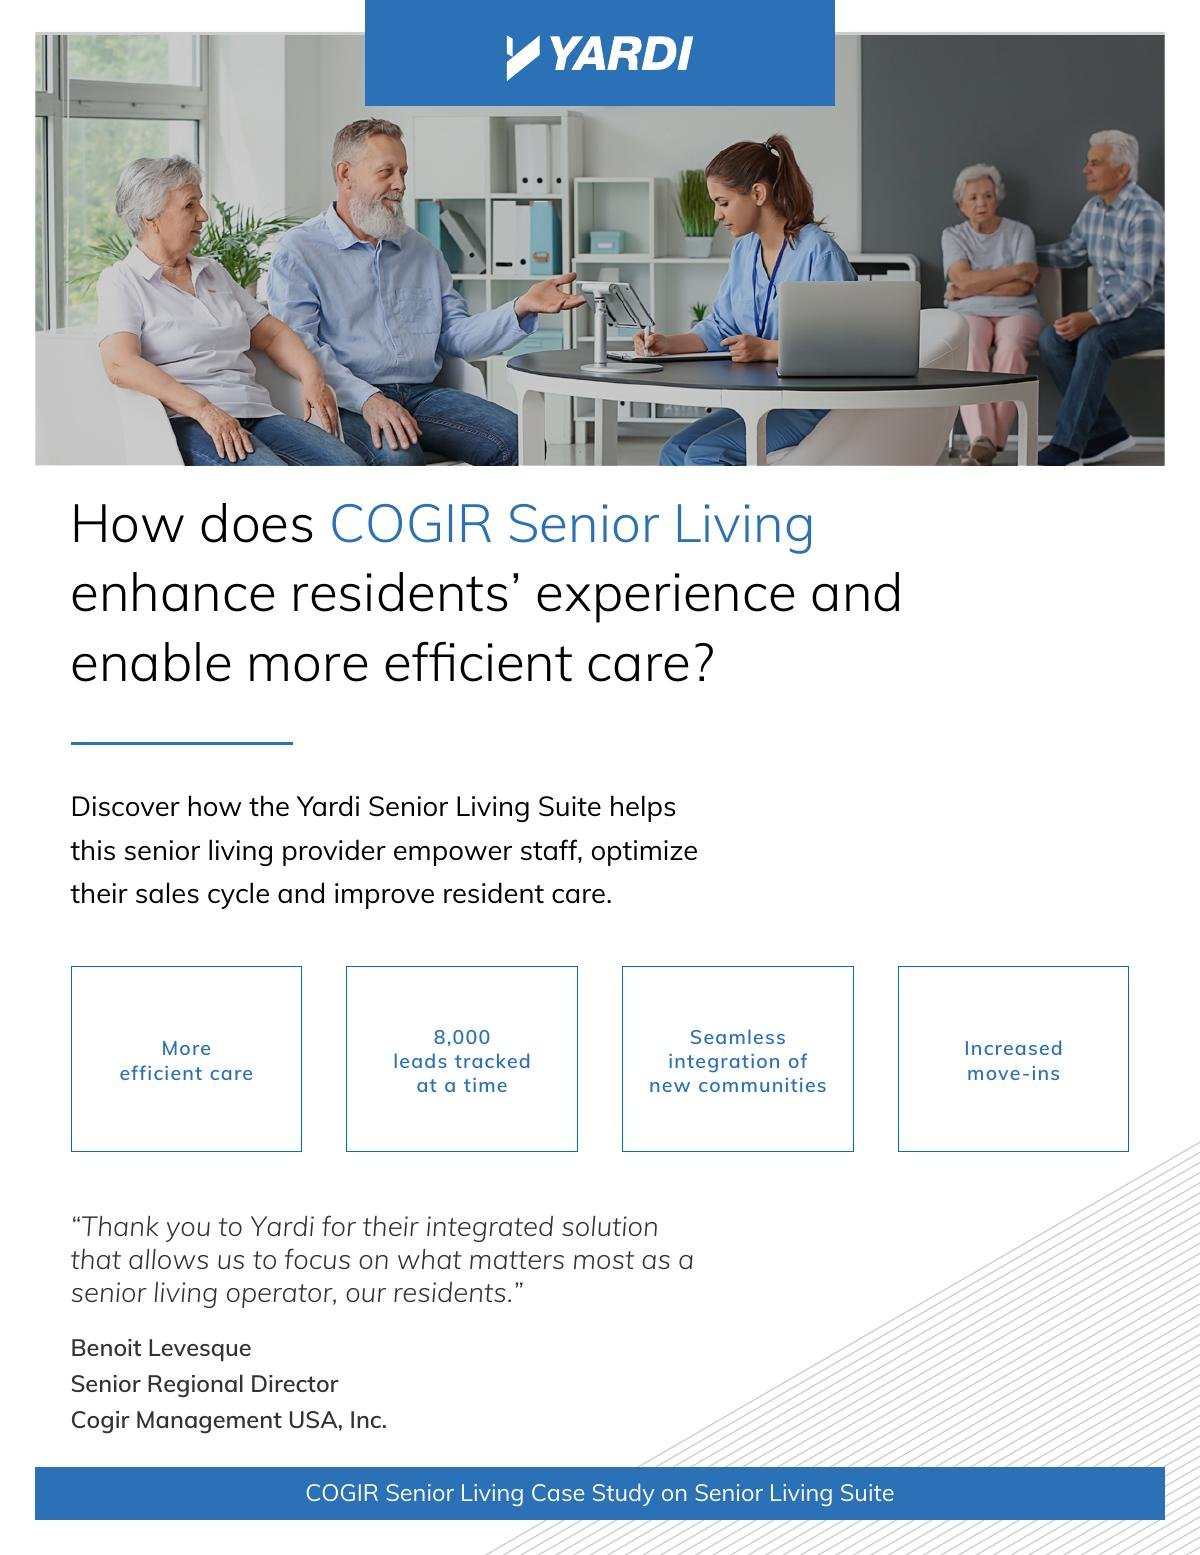 How does COGIR Senior Living enhance residents’ experience and enable more efficient care? 